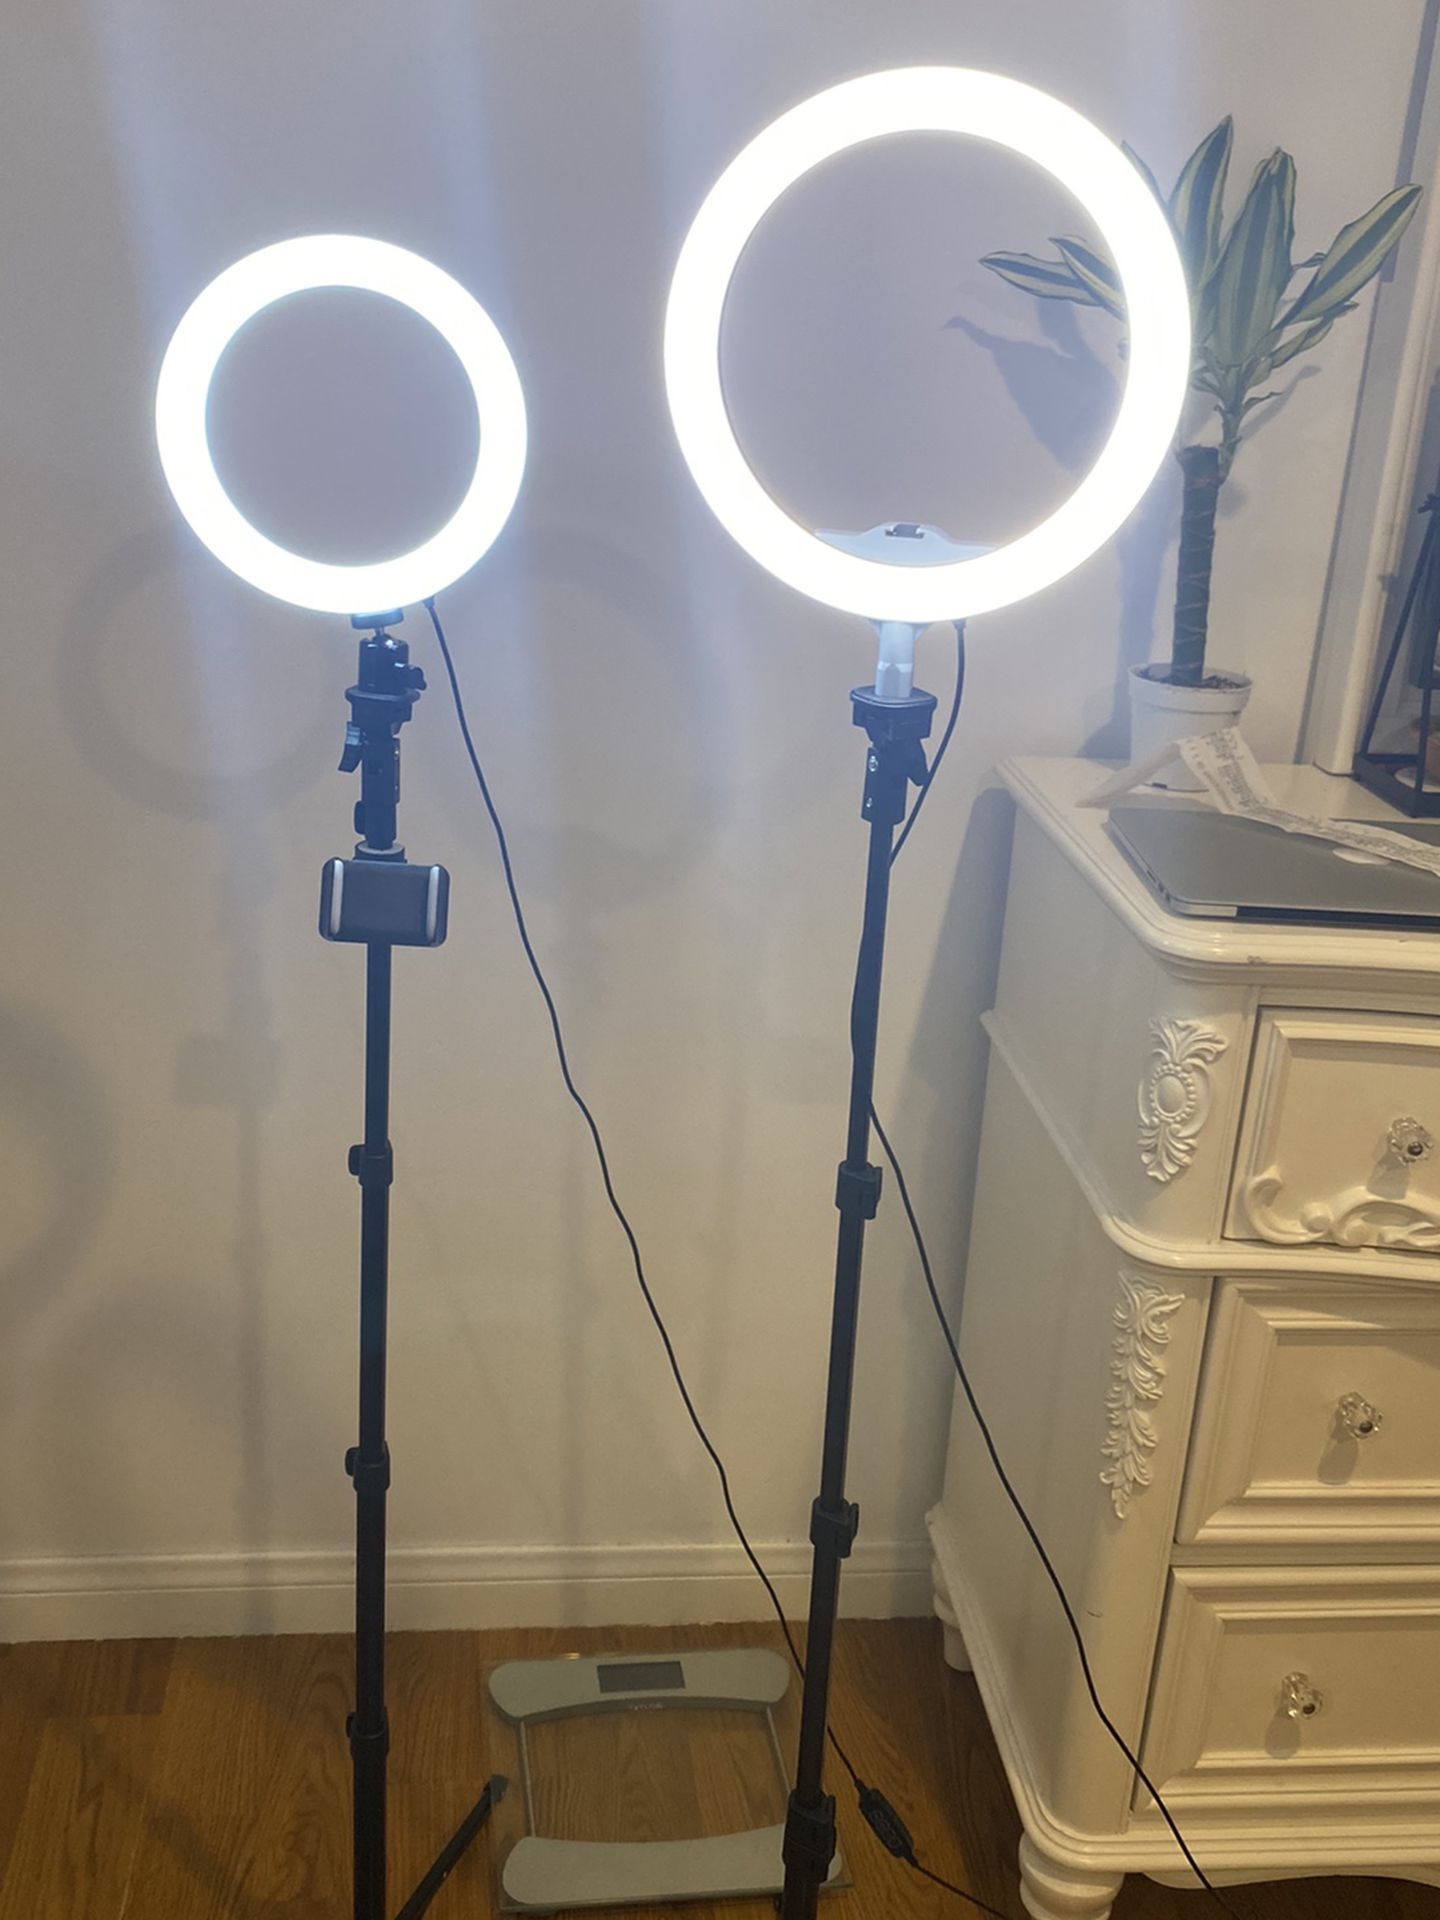 two selfie ring lights (8 inches & 10 inches)